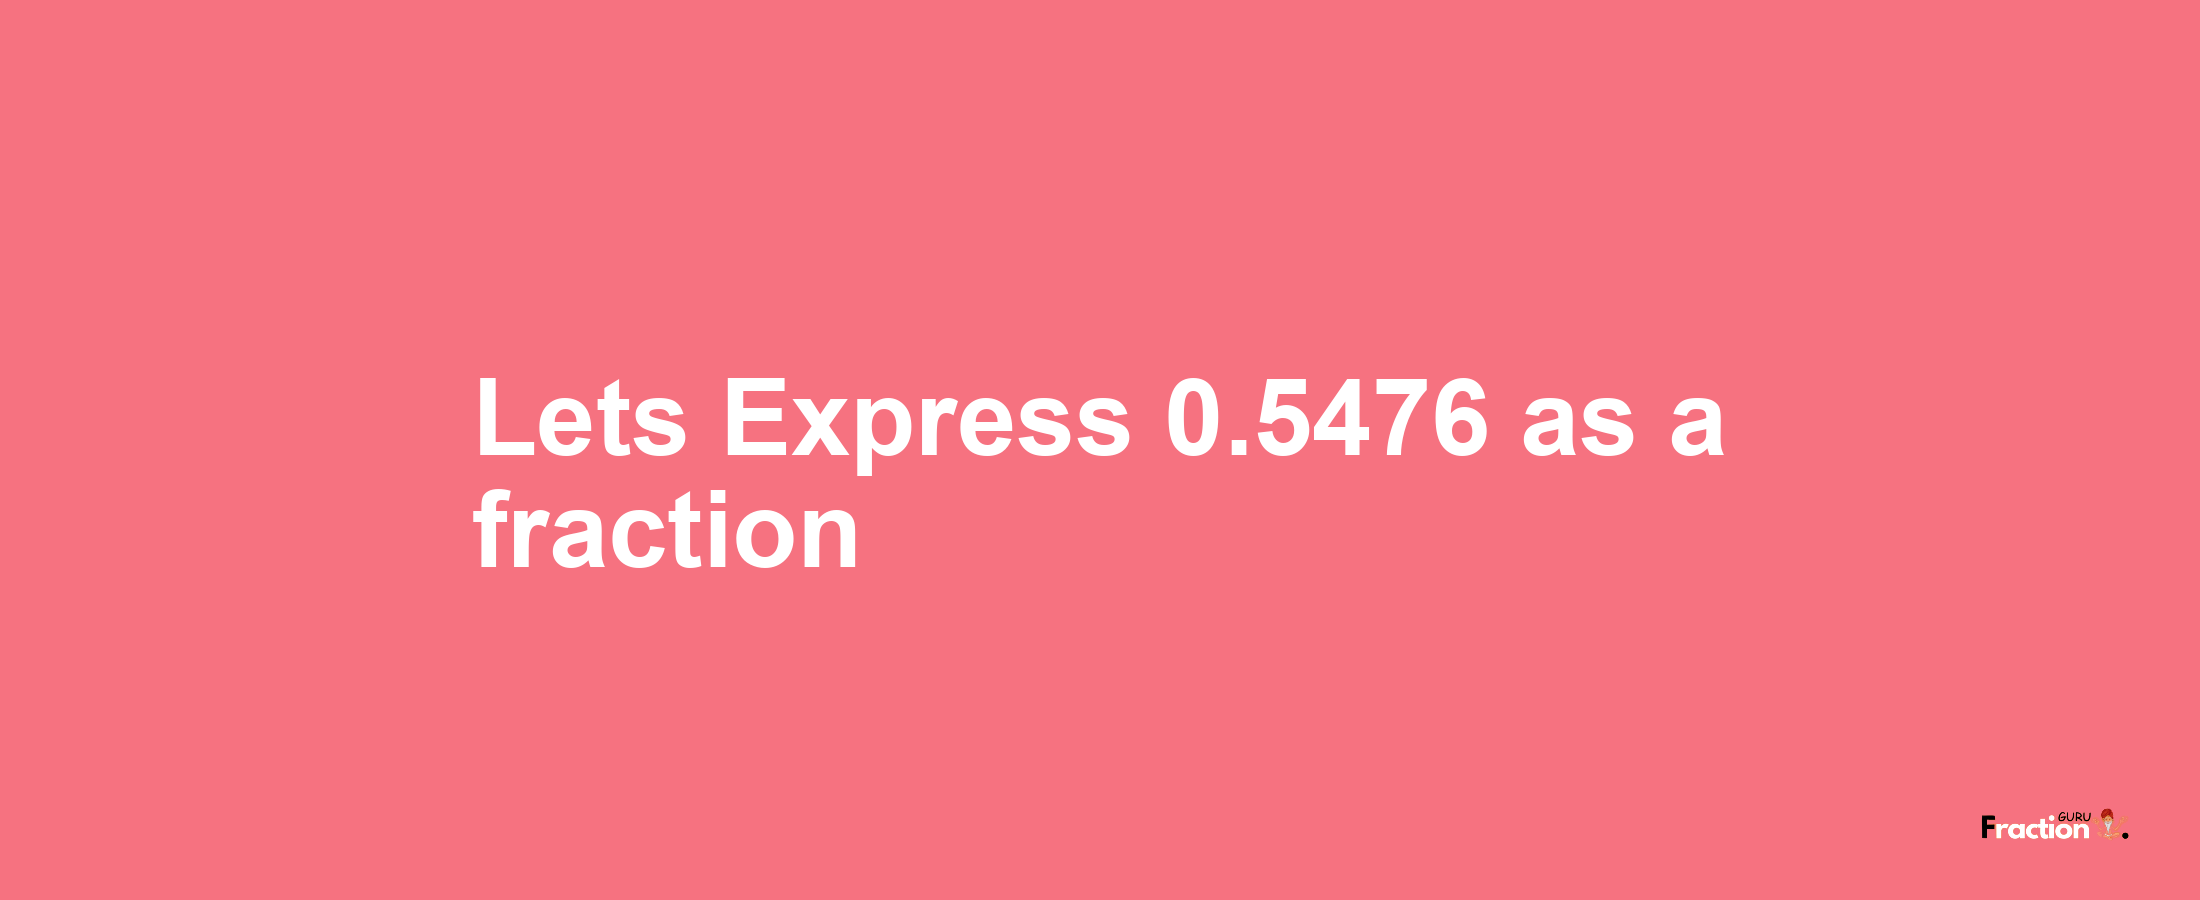 Lets Express 0.5476 as afraction